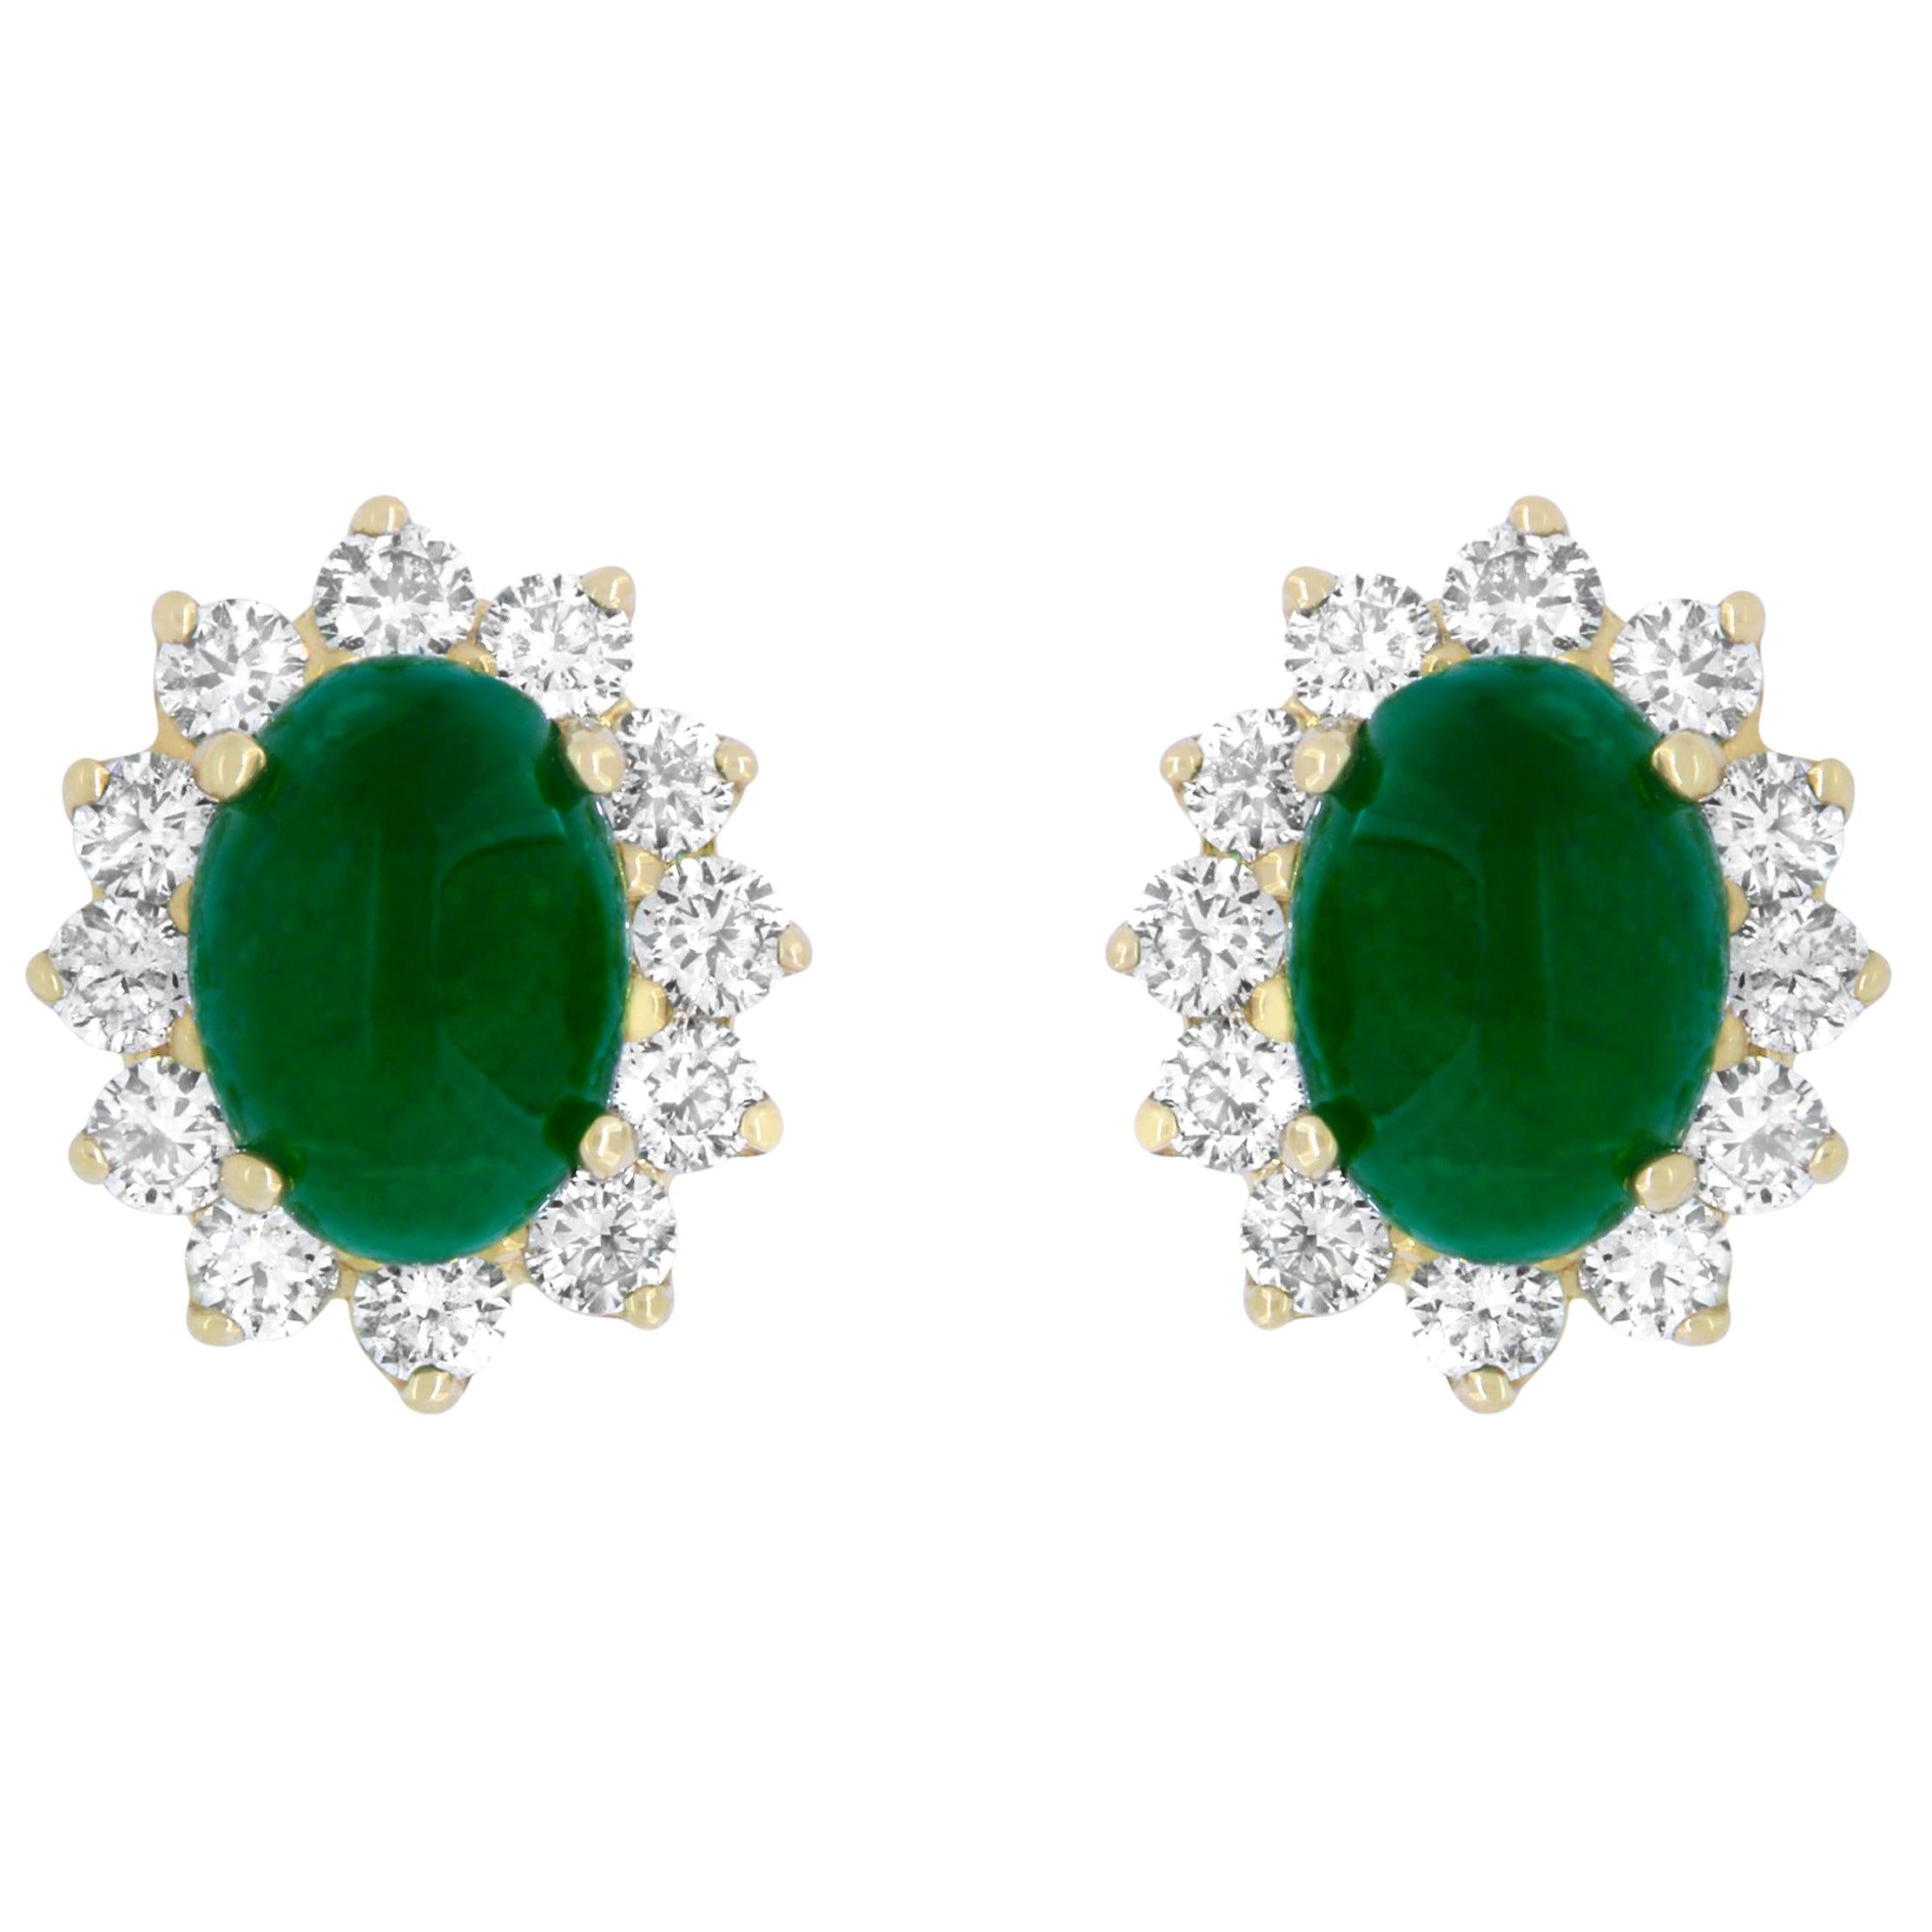 Oval Cabochon Emerald and White Diamond Stud Earring in Yellow Gold